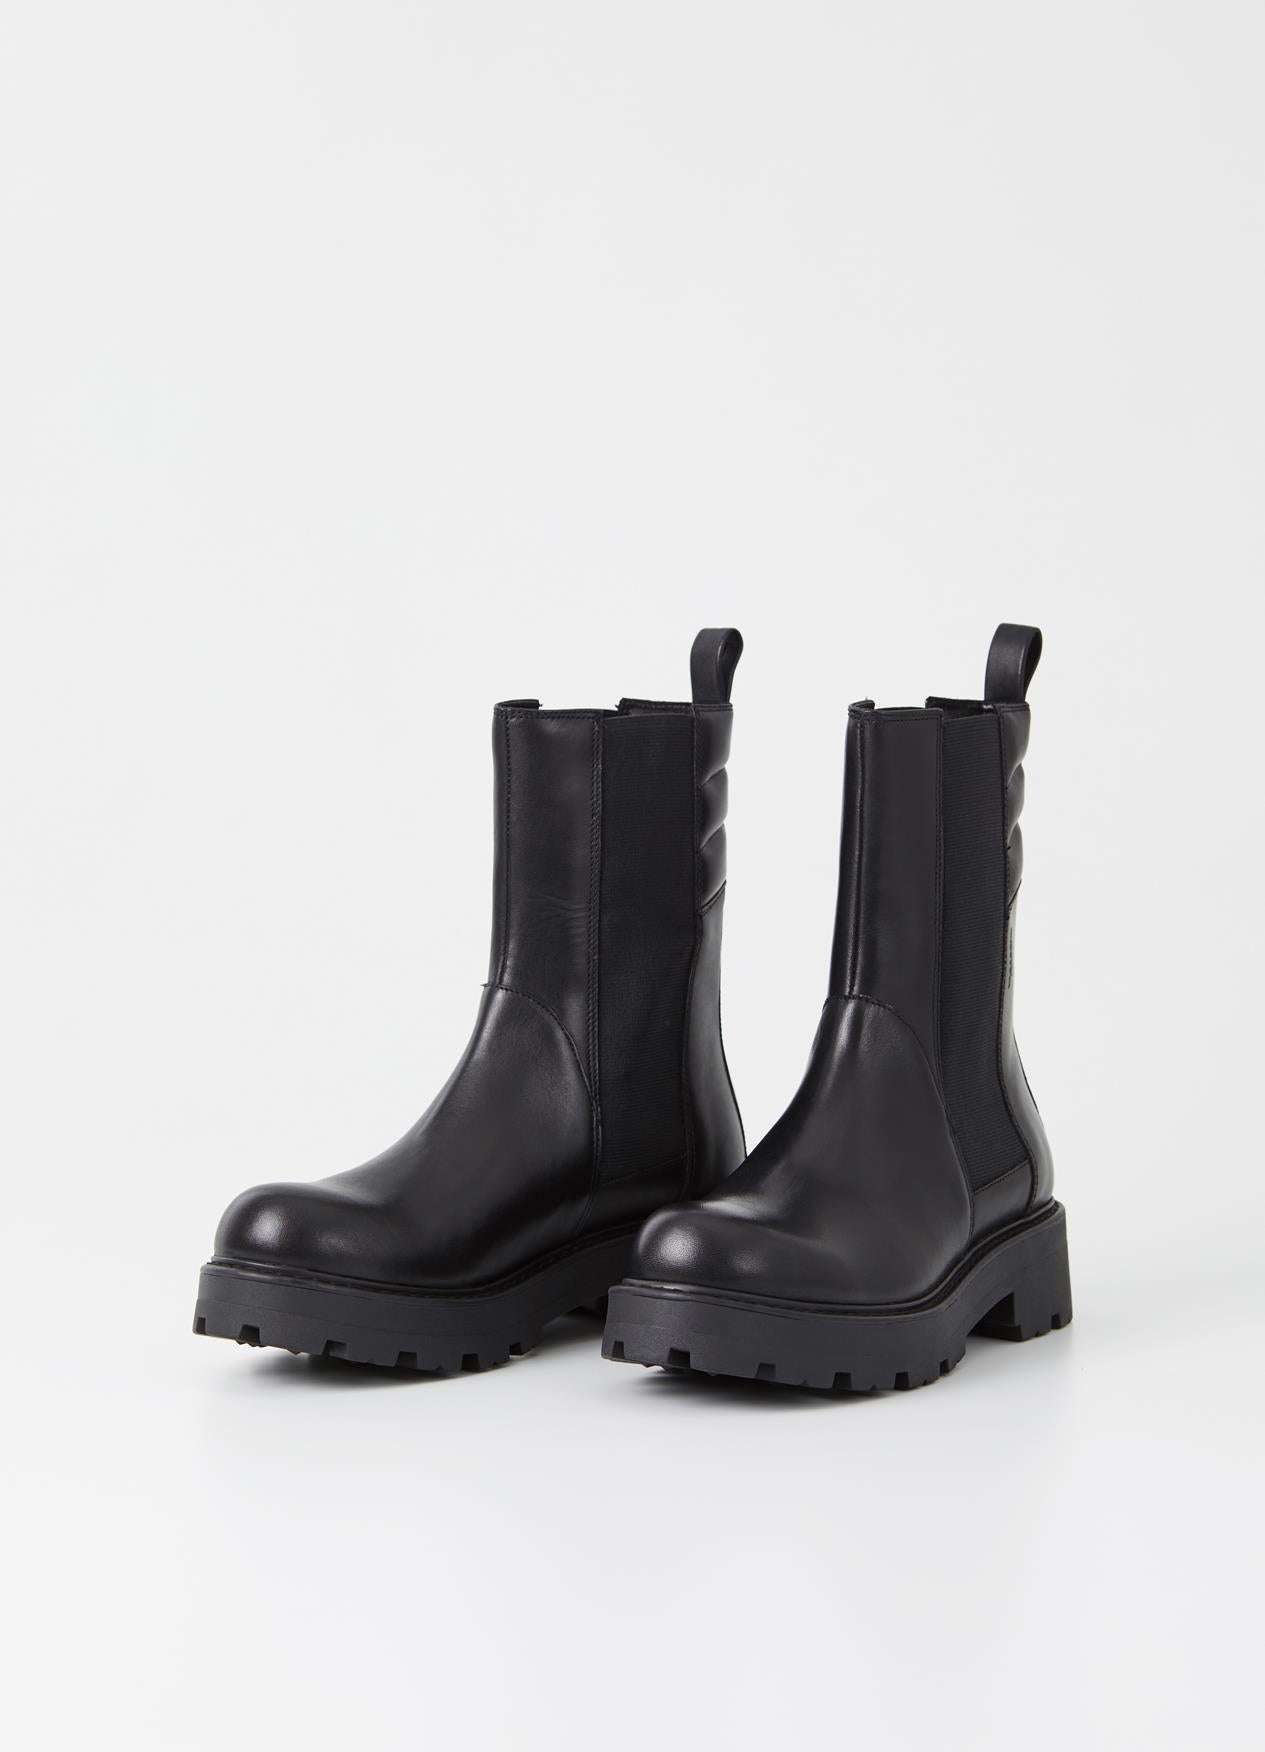 COSMO 2.0 ankle boot⎜Black